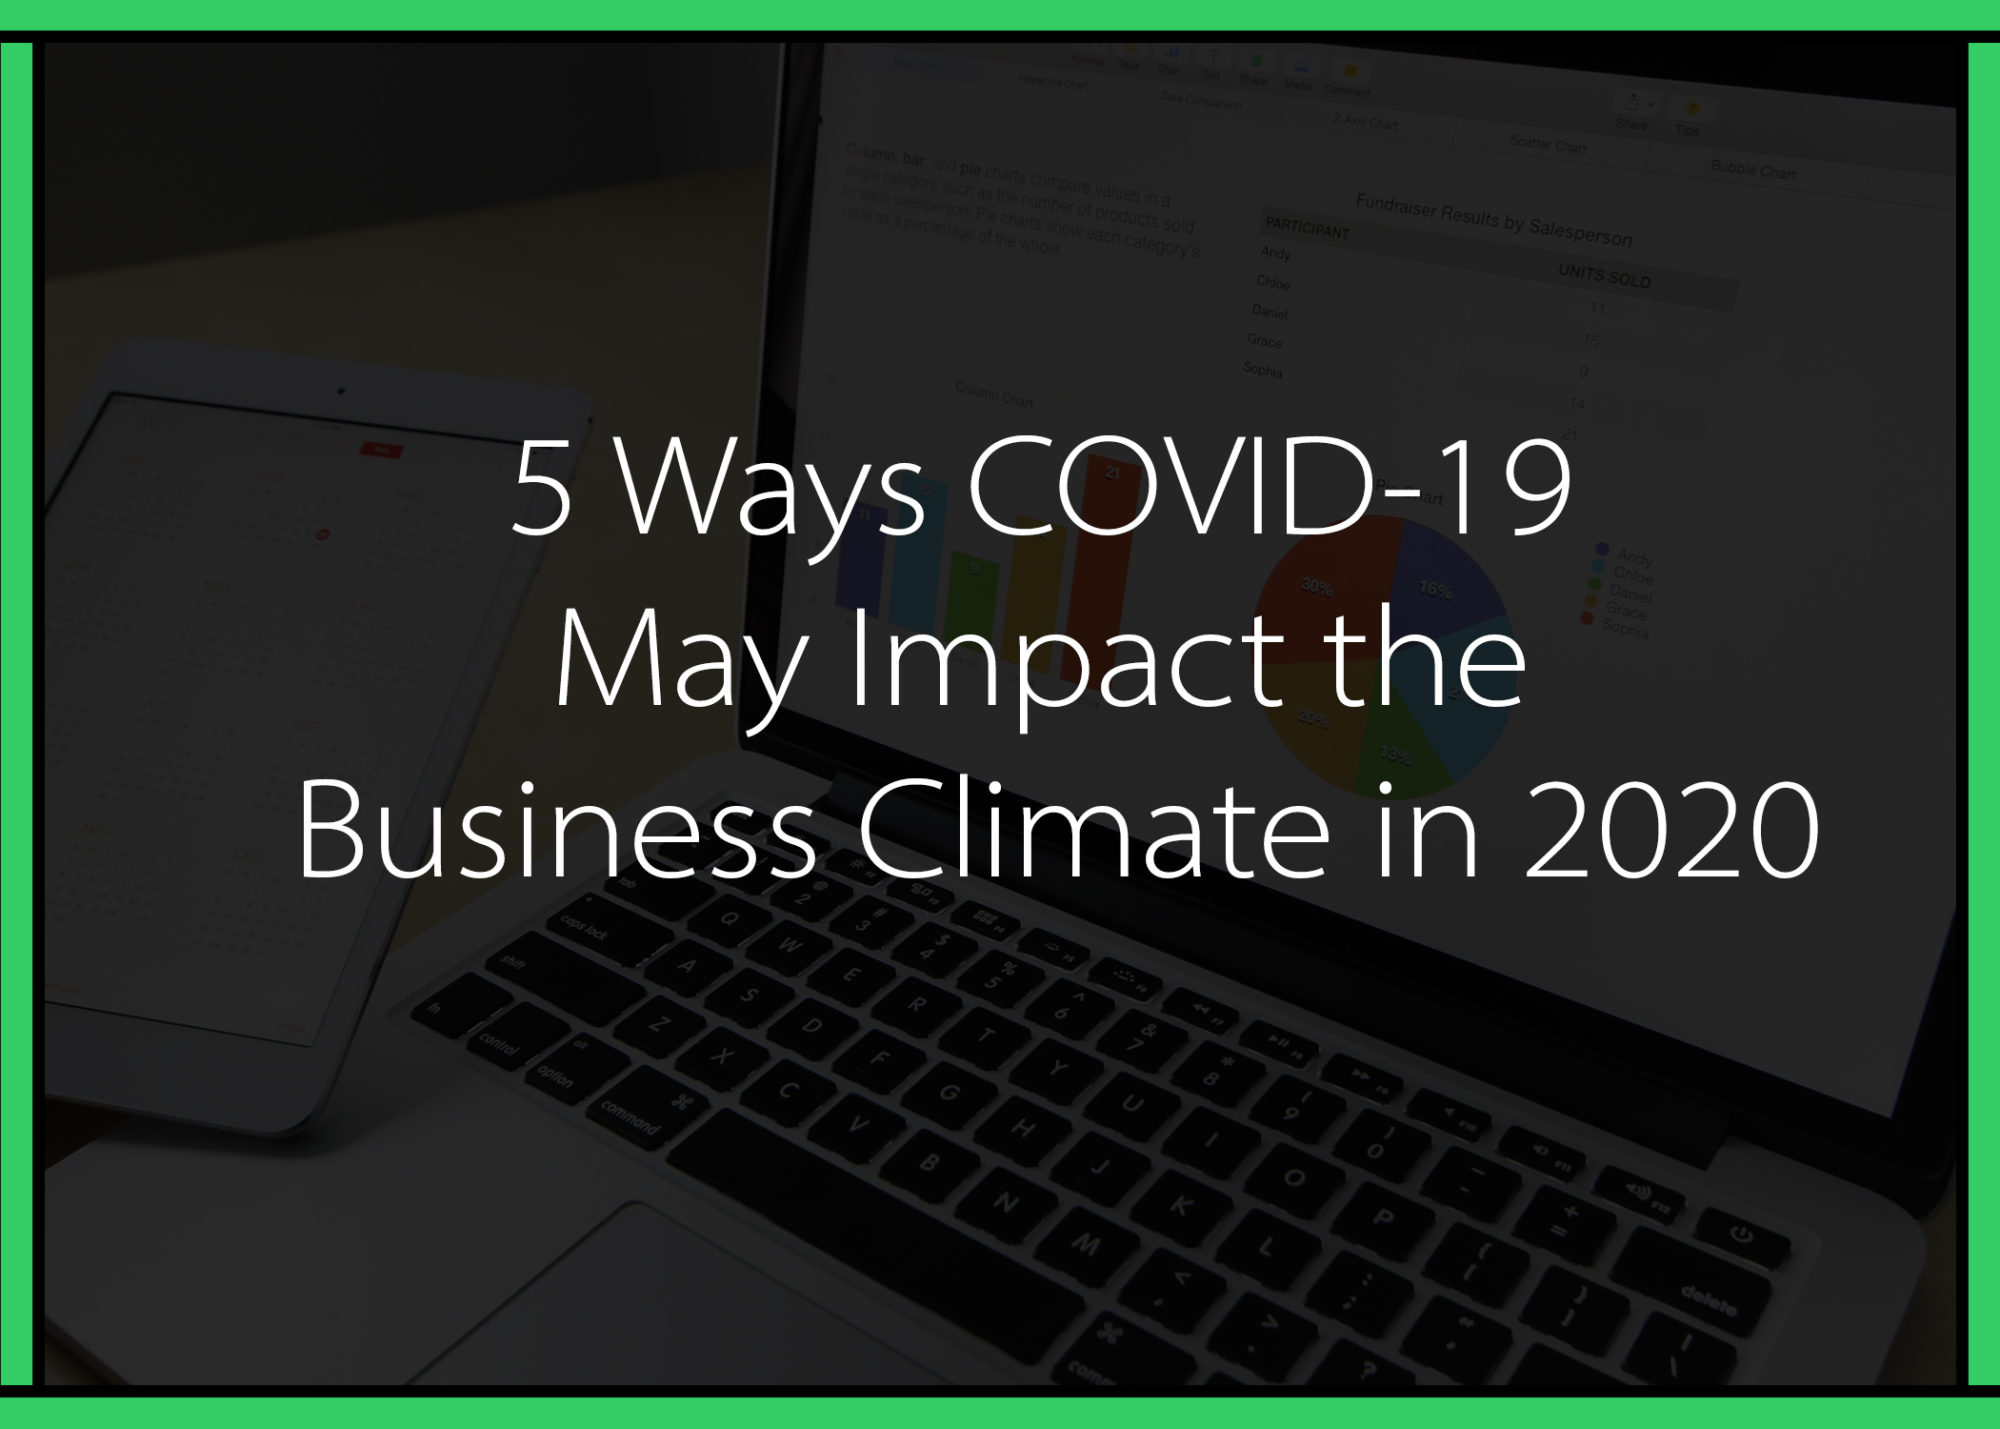 5 Ways COVID-19 May Impact the Business Climate in 2020